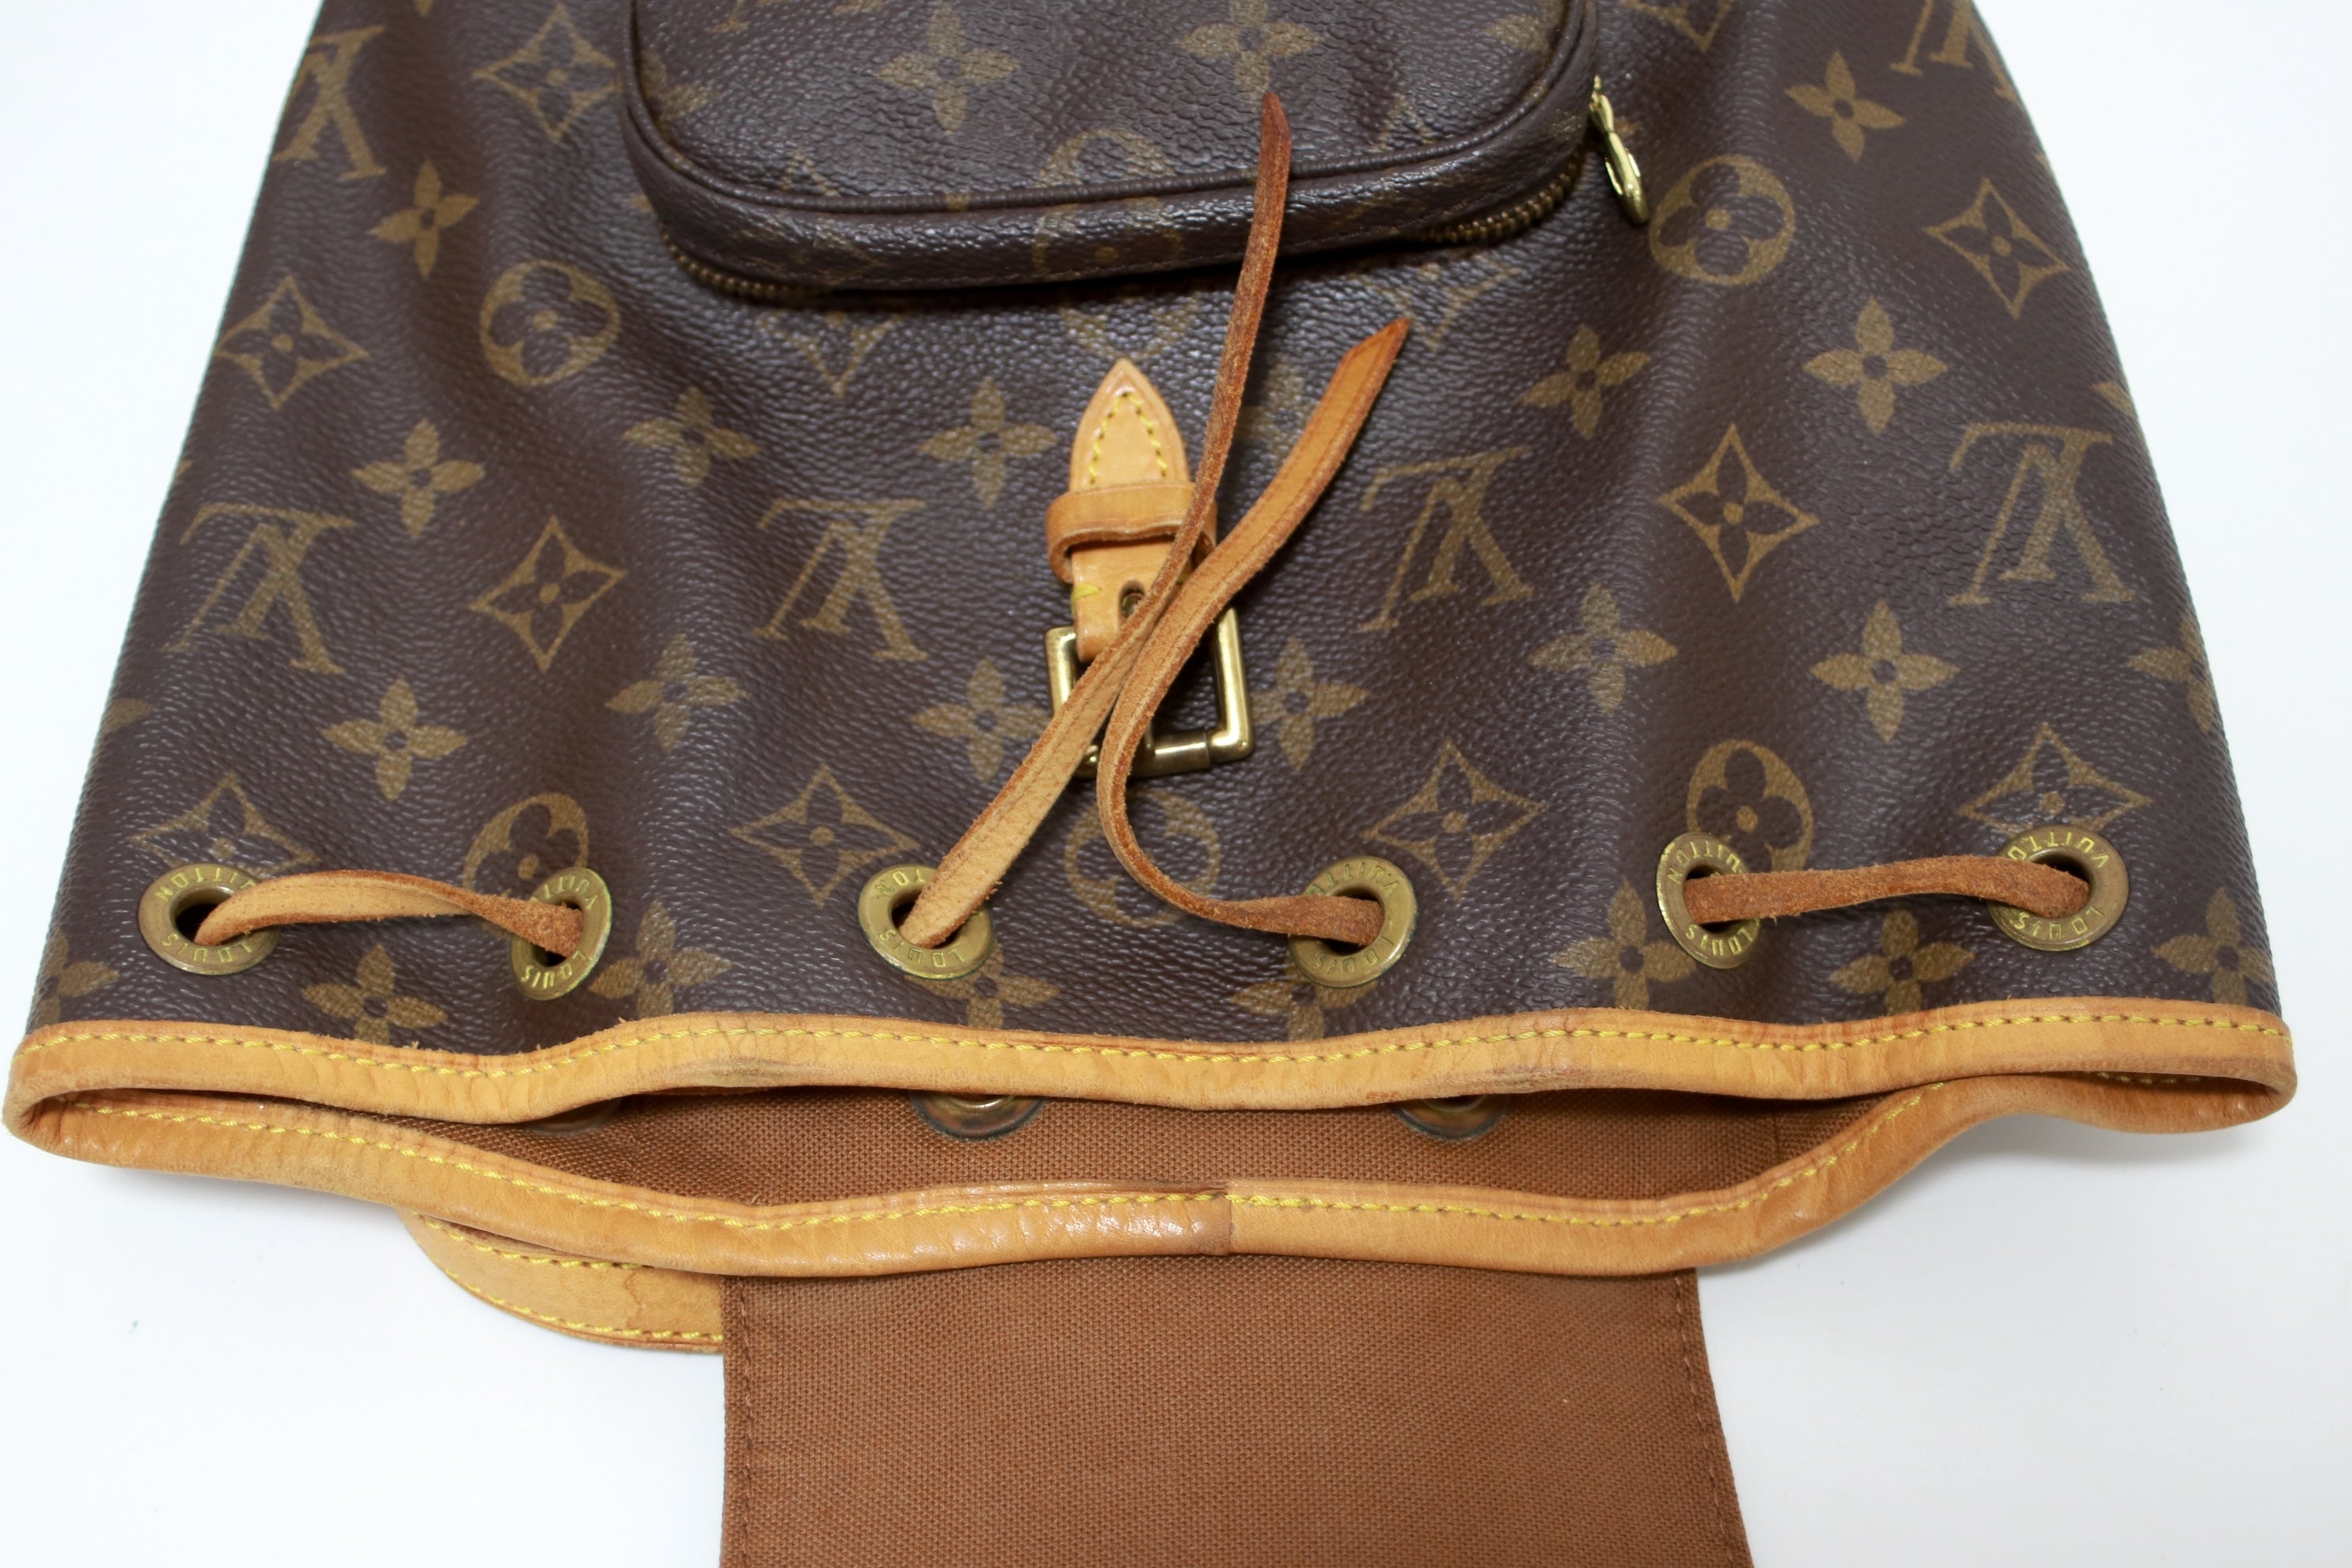 Louis Vuitton Montsouris PM Backpack Used (8385)